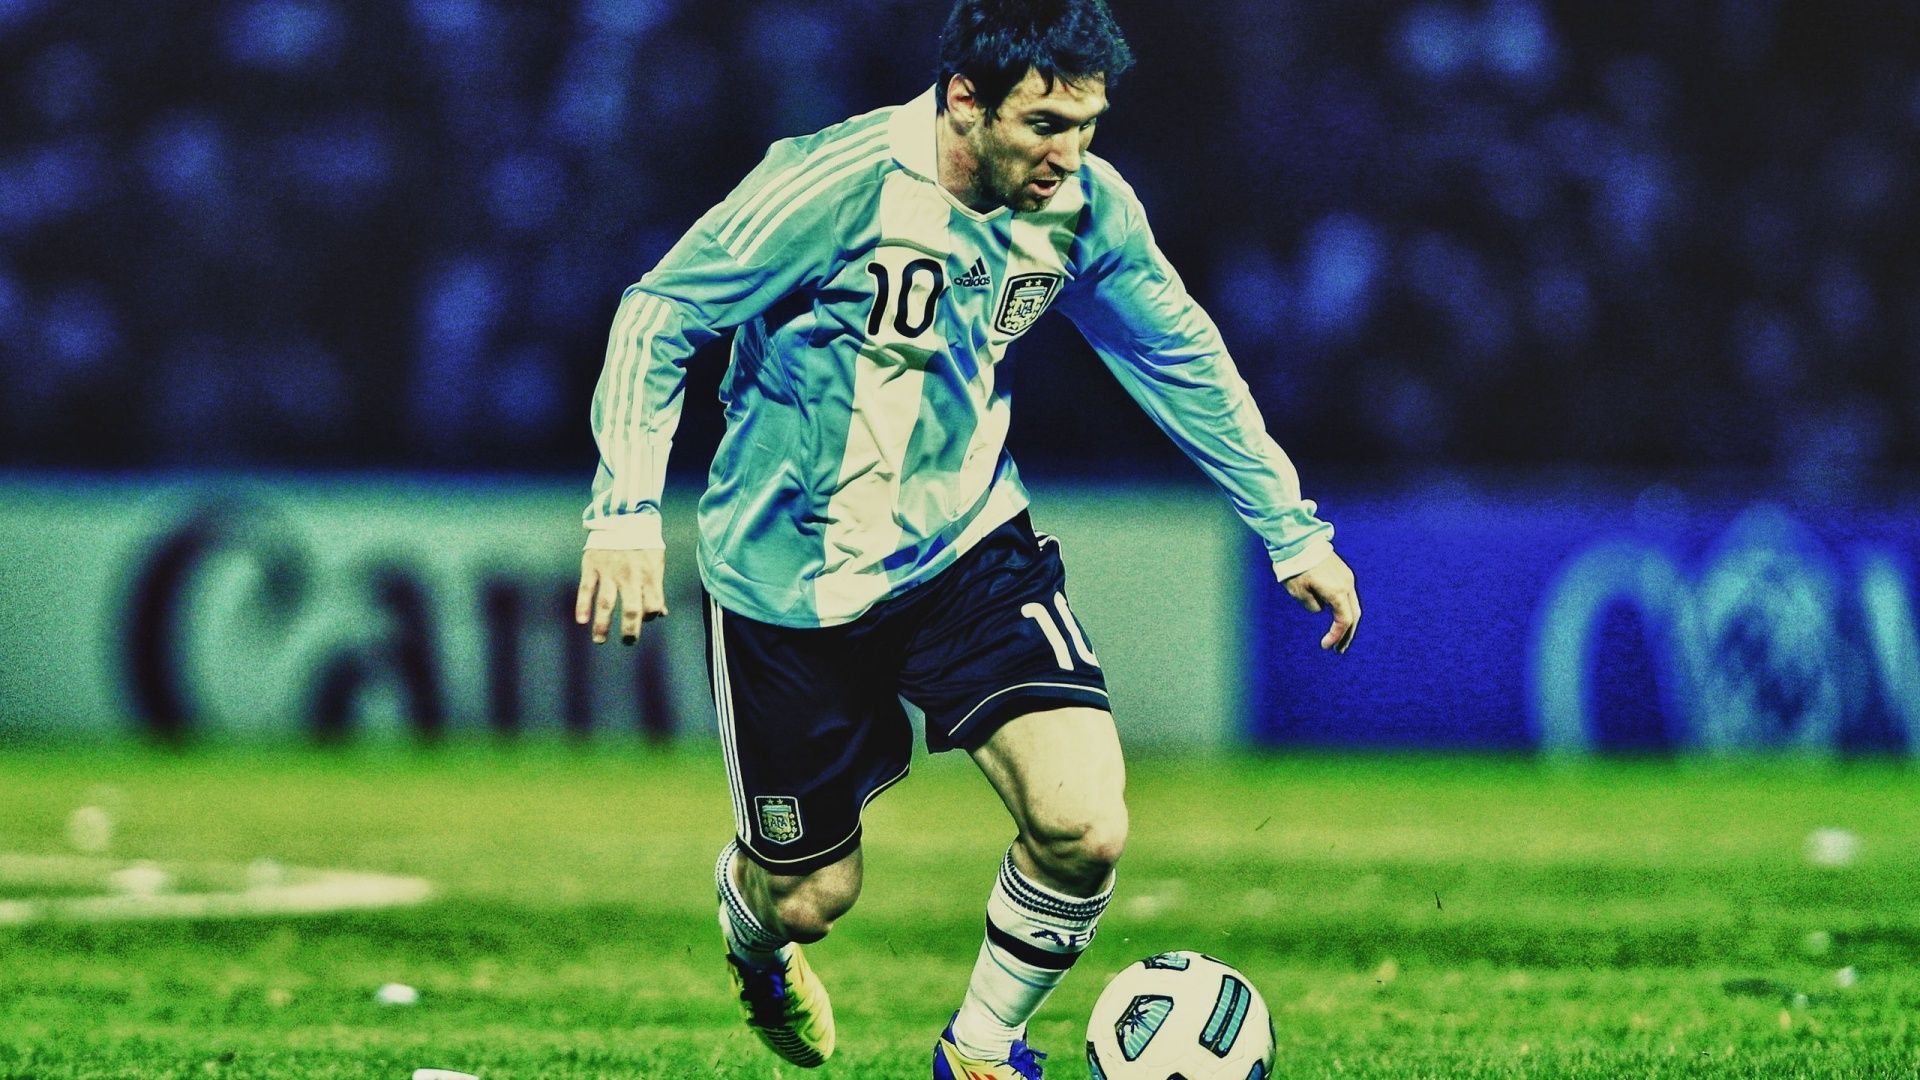 Football Sport Messi Background Wallpaper | I HD Images